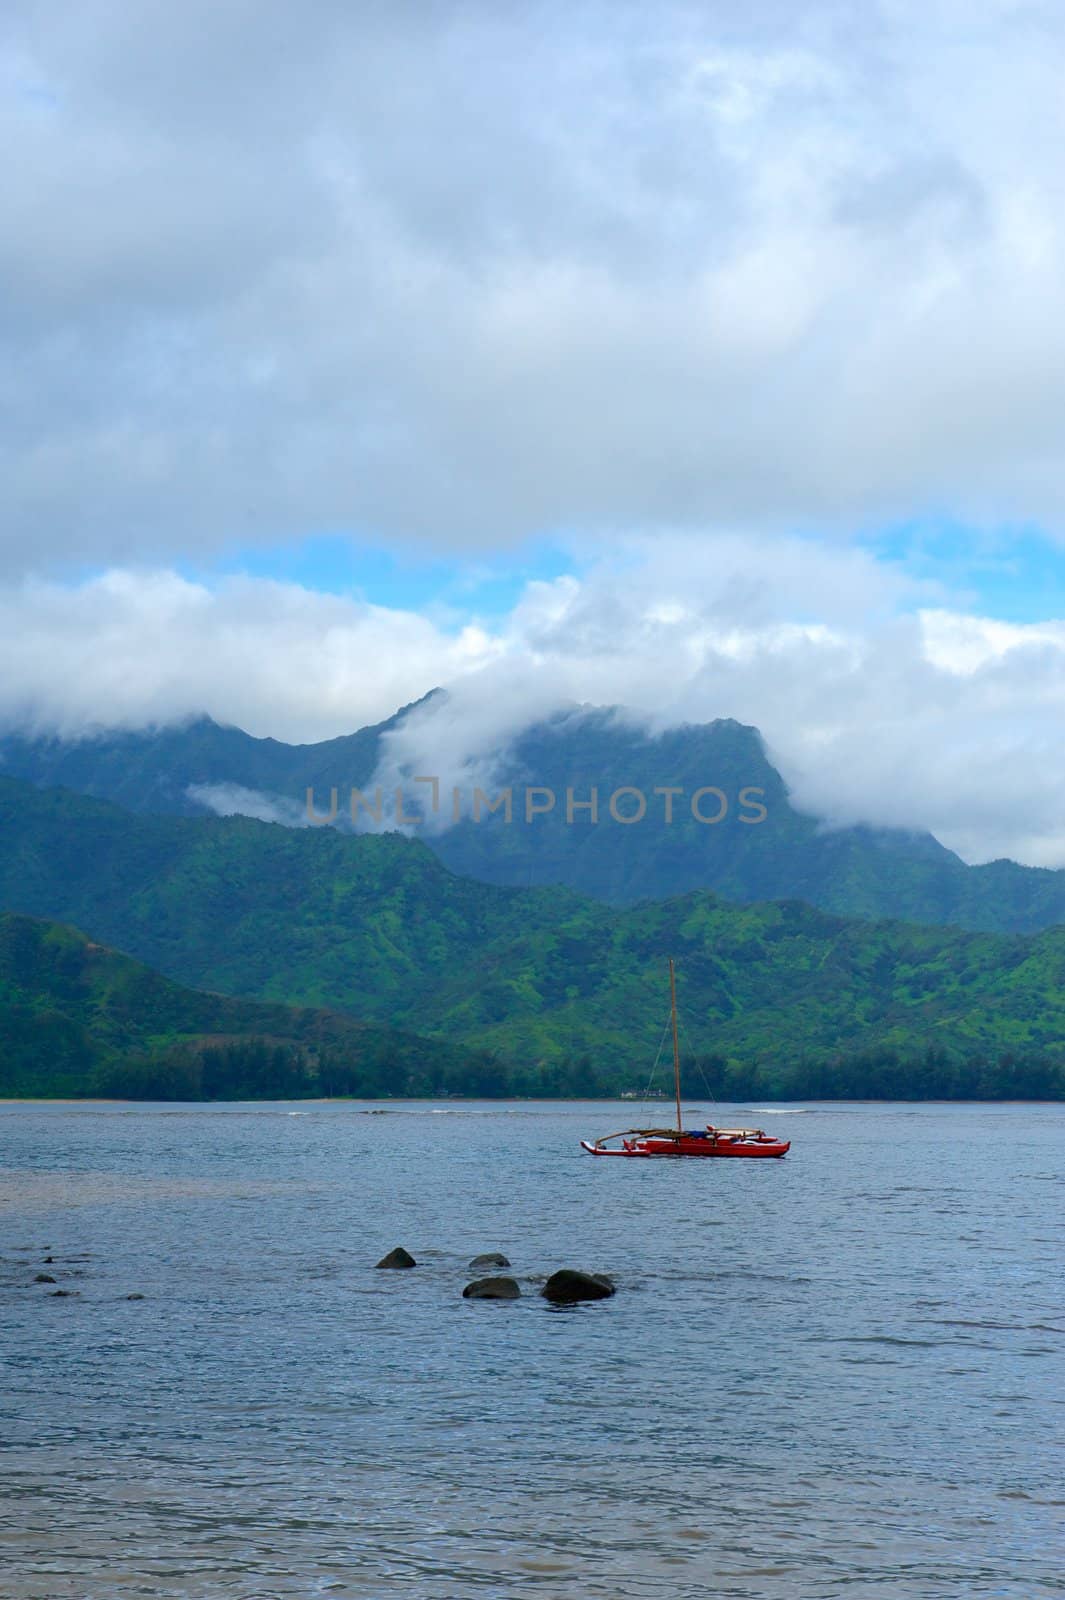 A red, double hull, catamaran sits parked off the verdant green coast of the island of Kauaii in Hawaii